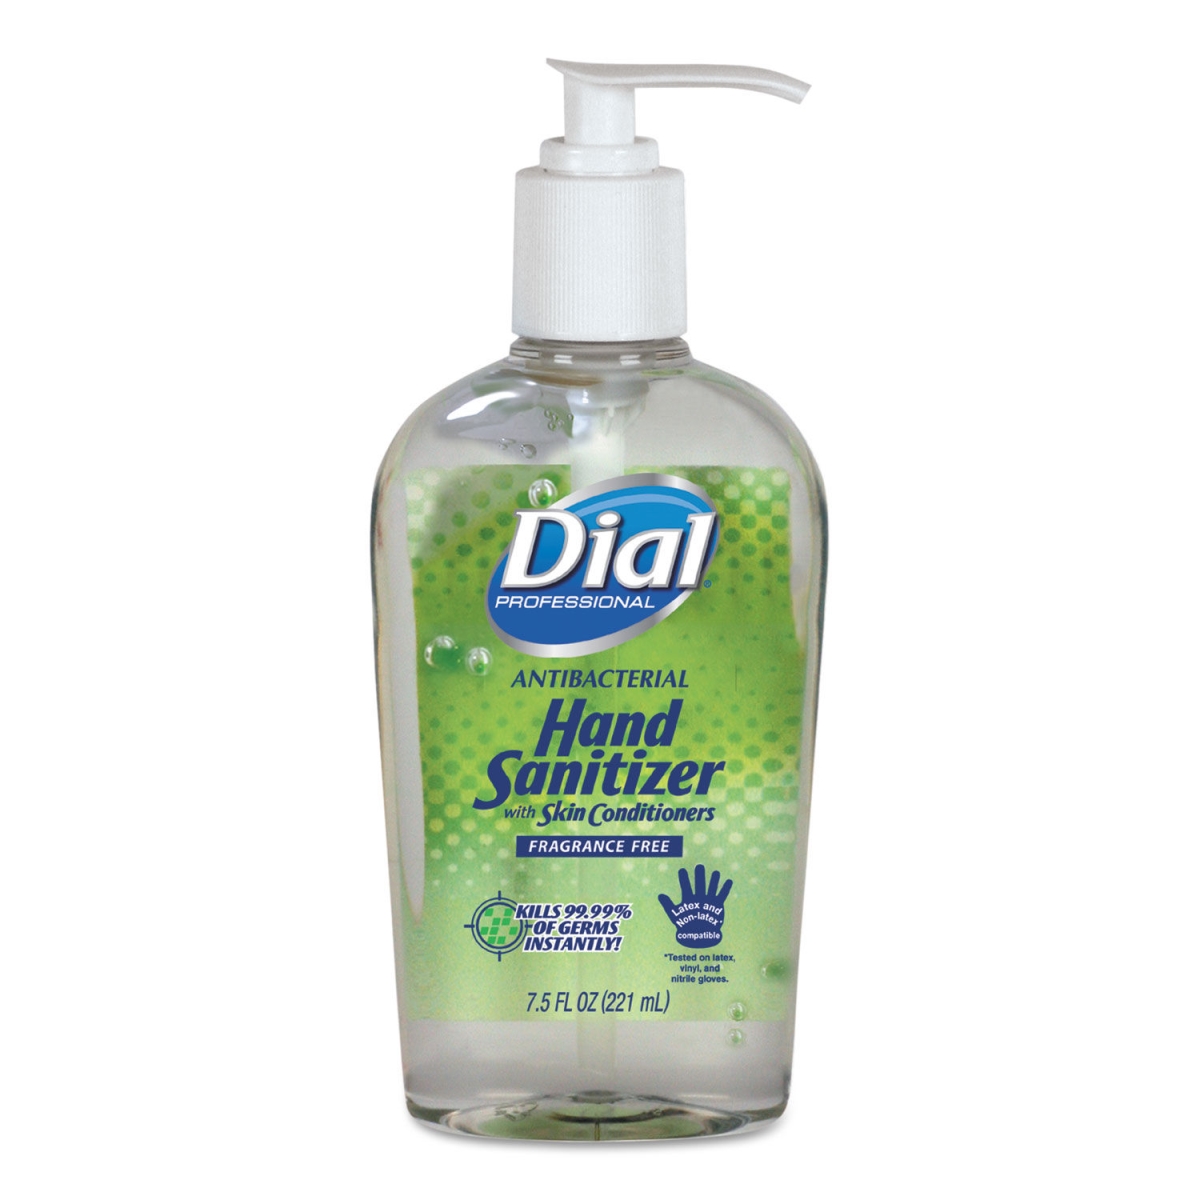 Picture of Dialsuplys DIA01585 7.5 oz Dial hygienic with Moisturizers Gel Hand Sanitizer